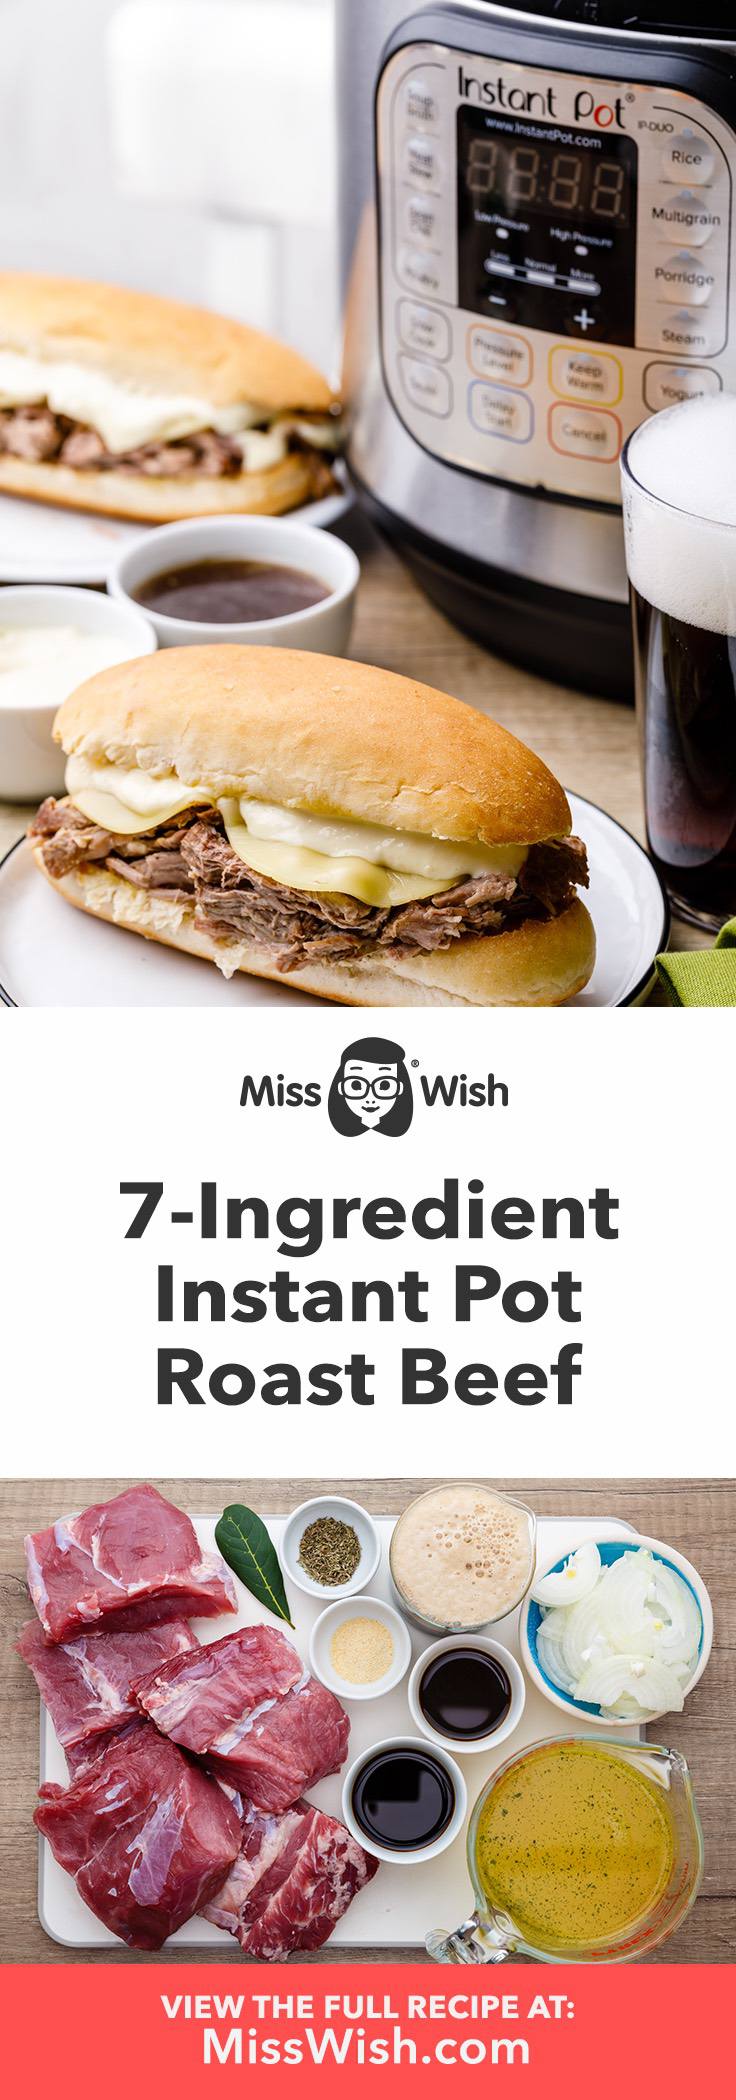 Tender 7-Ingredient Instant Pot Roast Beef for Epic Sandwiches